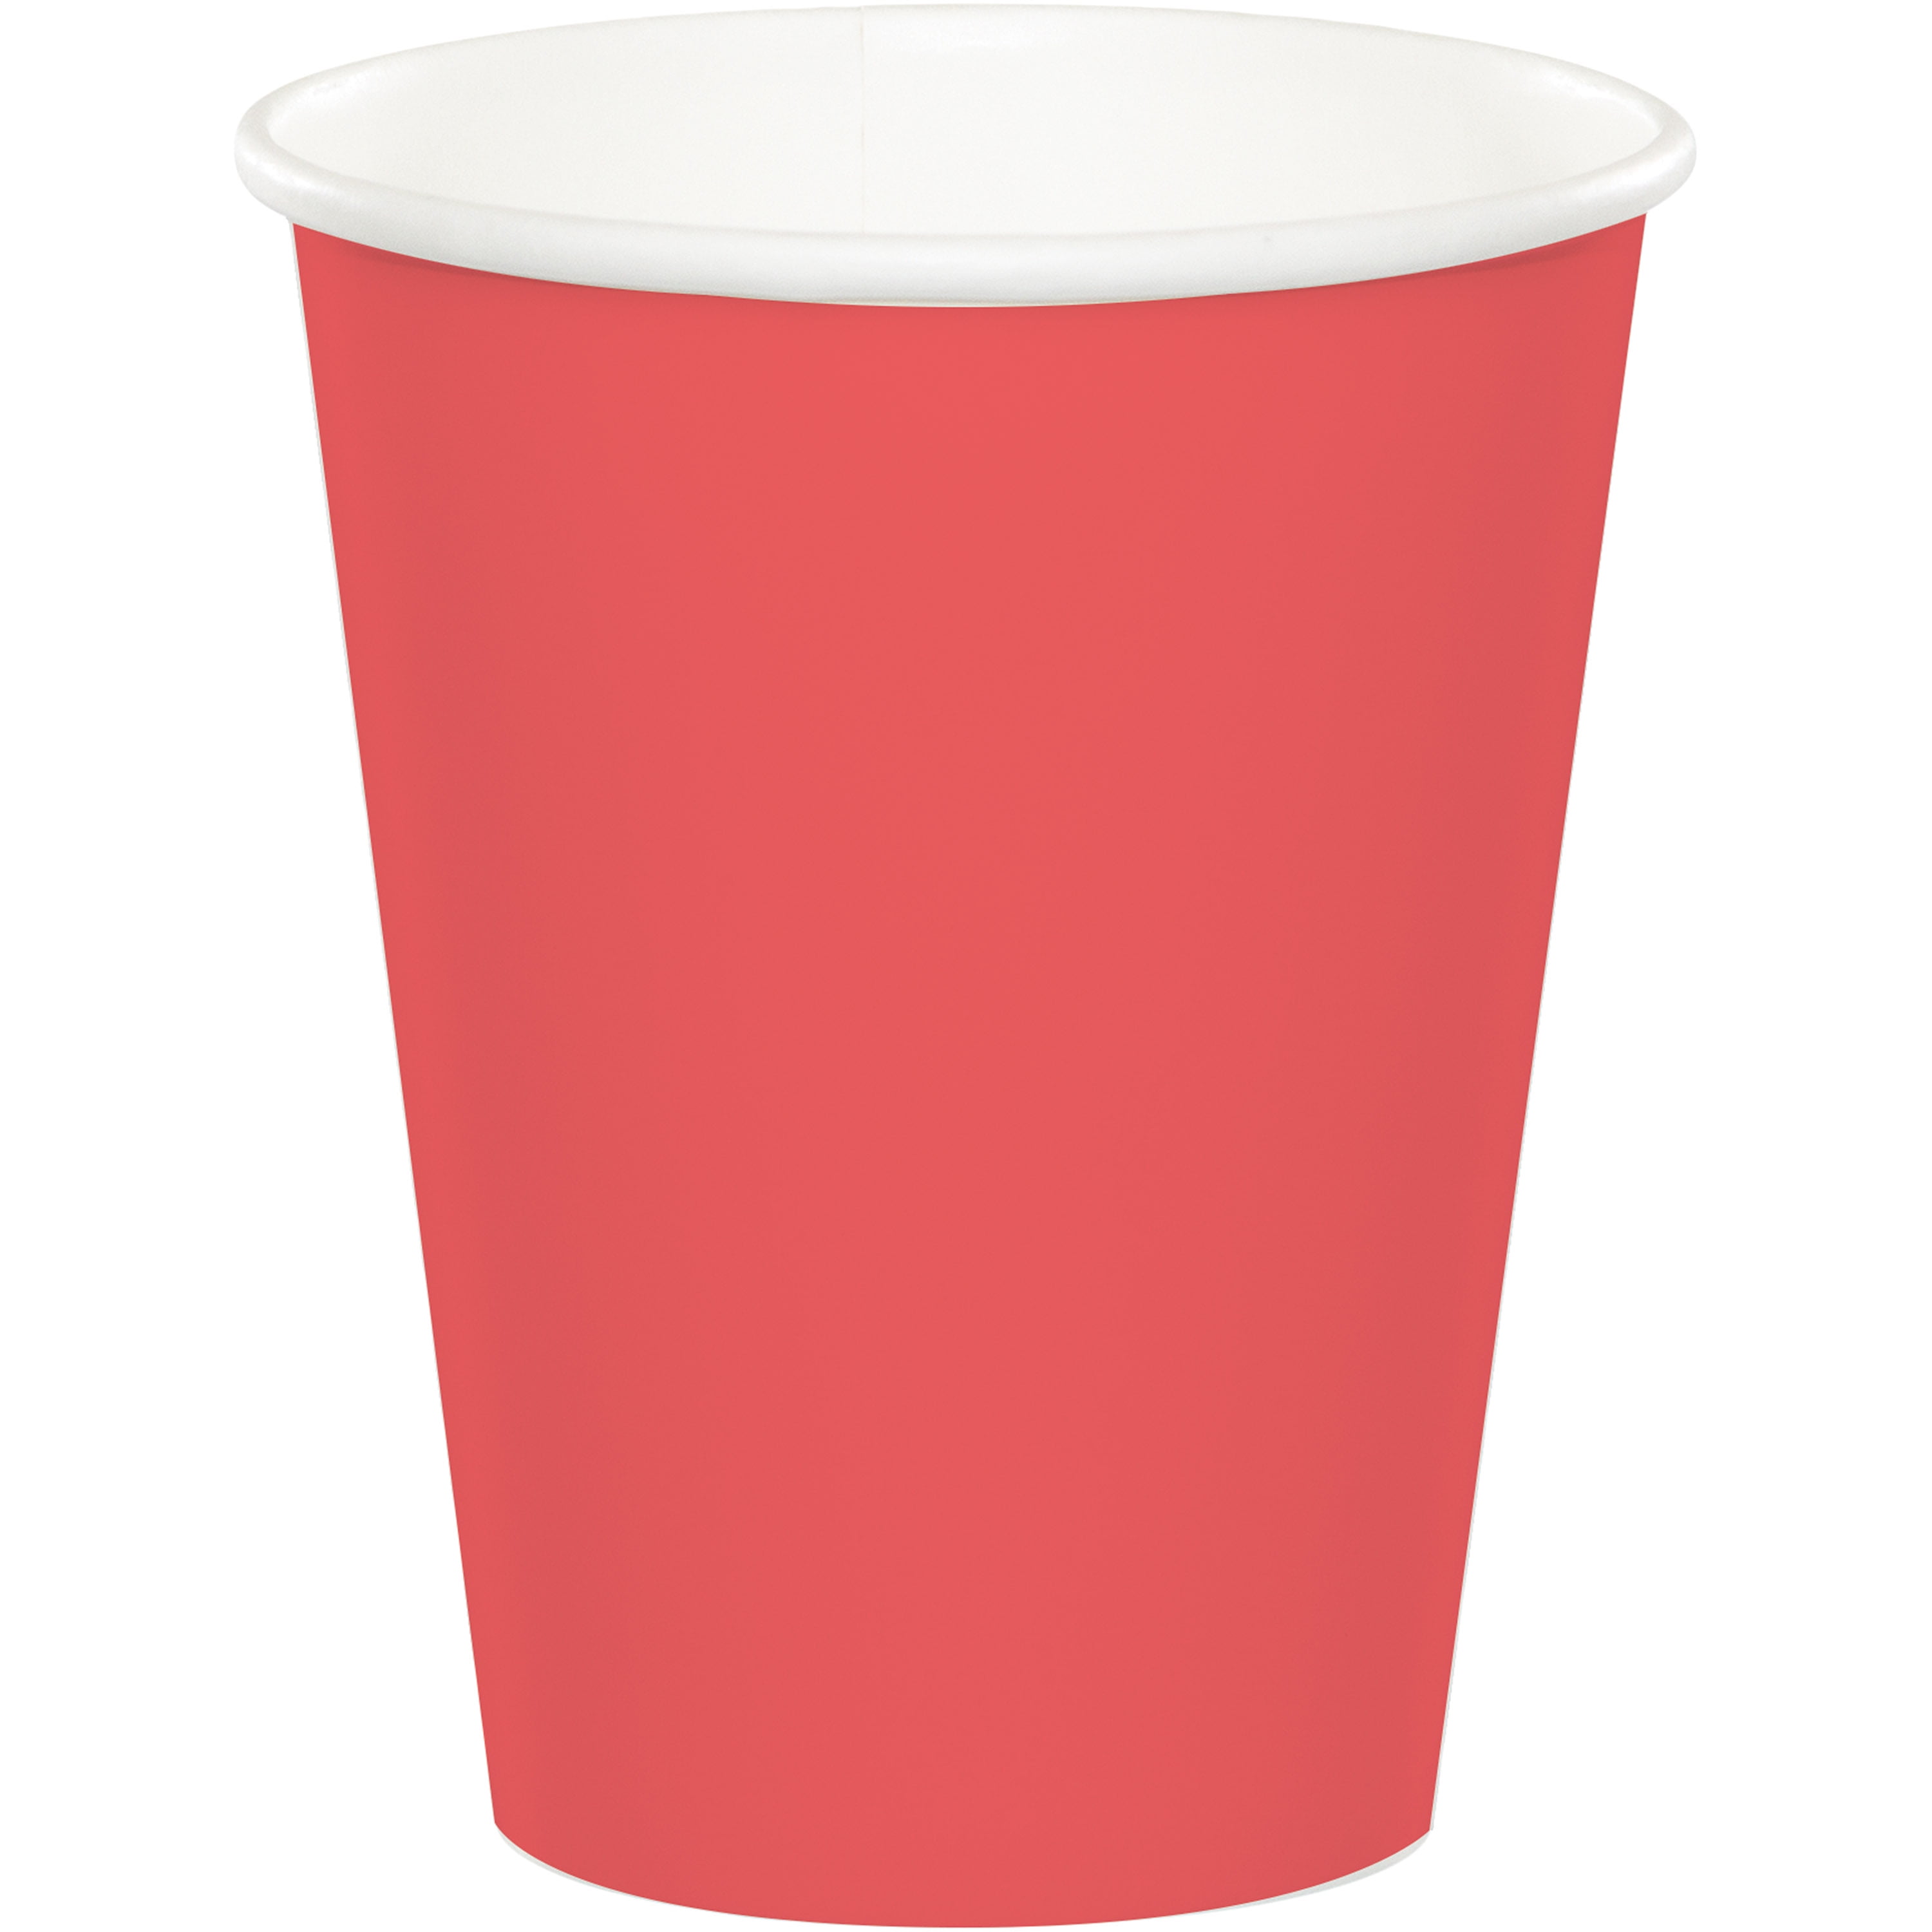 Touch of Color Hot/Cold Cups, 9 oz, Burgundy - 24 count